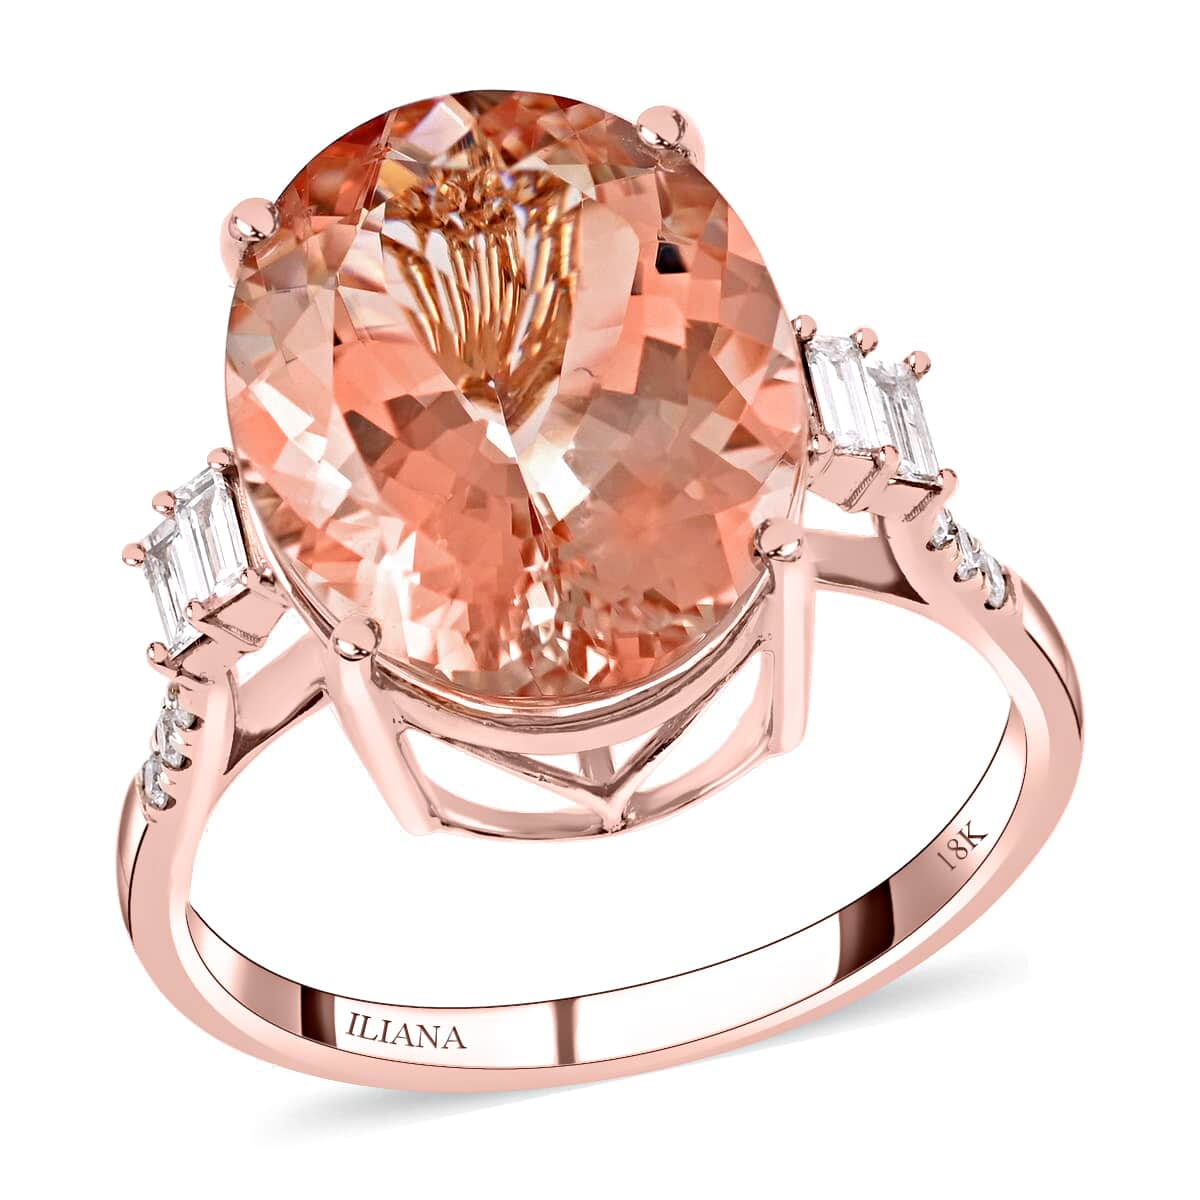 Certified & Appraised ILIANA 18K Rose Gold AAA Marropino Morganite and G-H I1 Diamond Ring 3.35 Grams 8.00 ctw (Delivered in 20-25 Business Days) image number 0